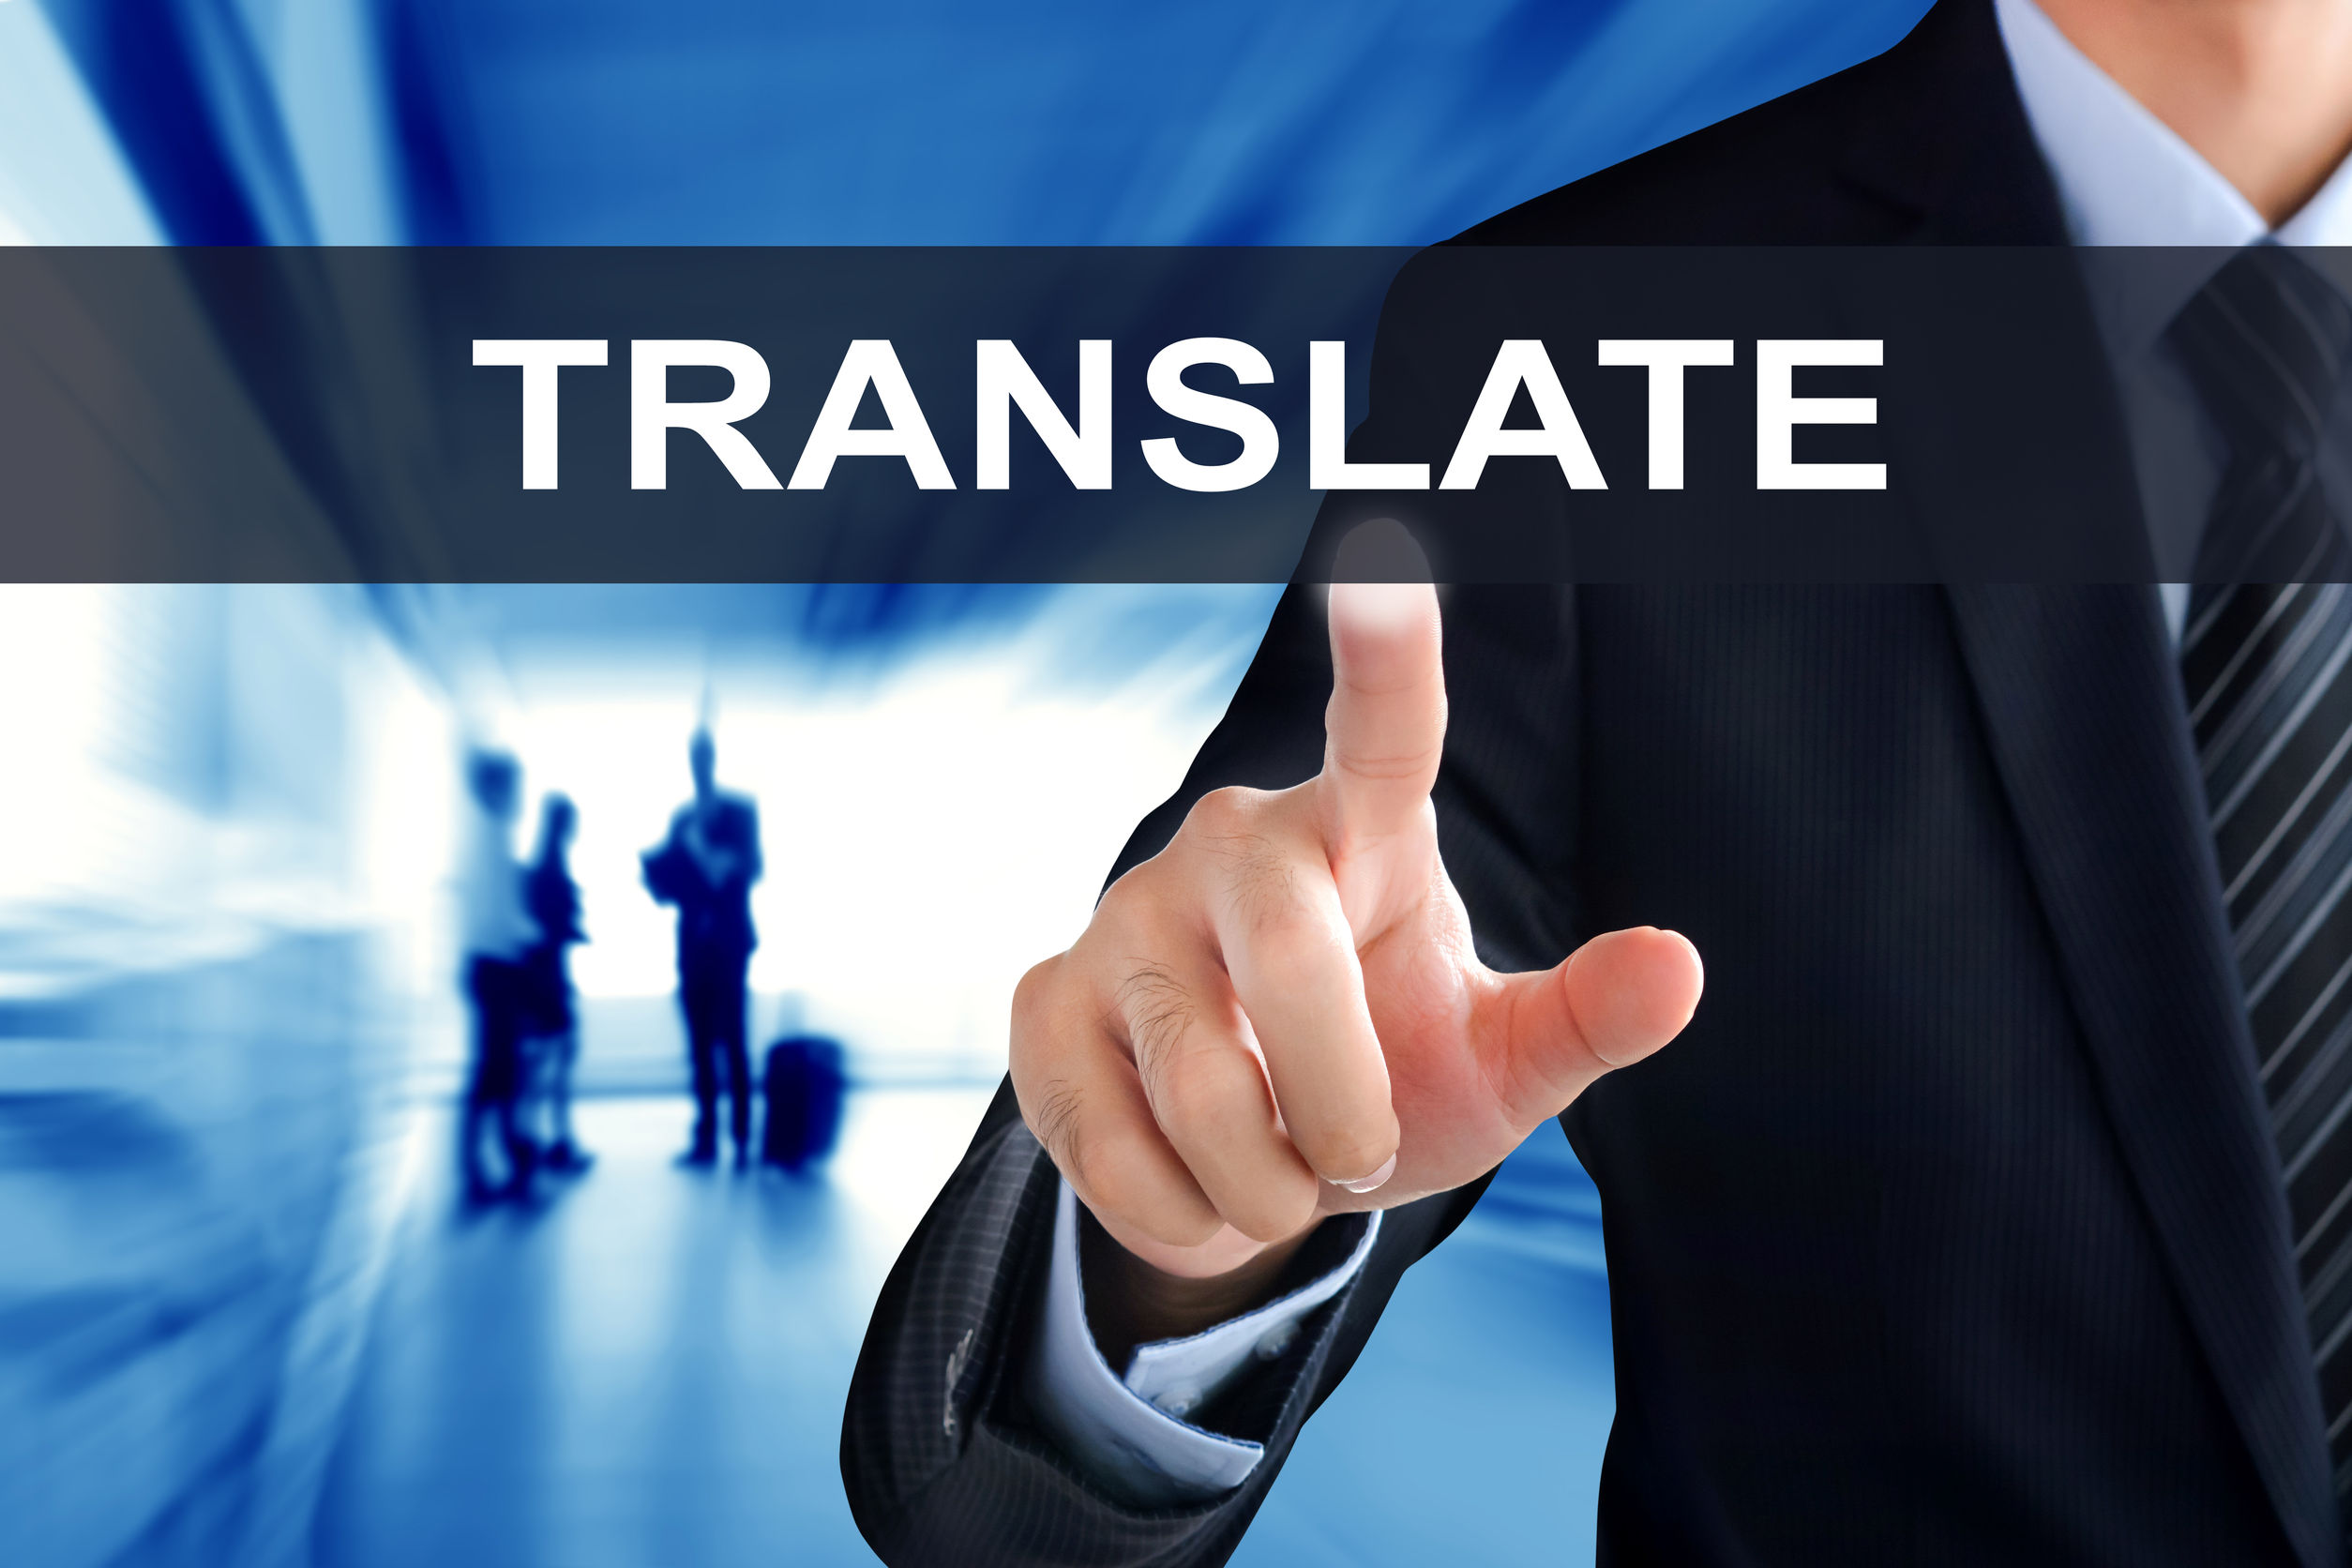 What Qualities To Look For in a Translation Company